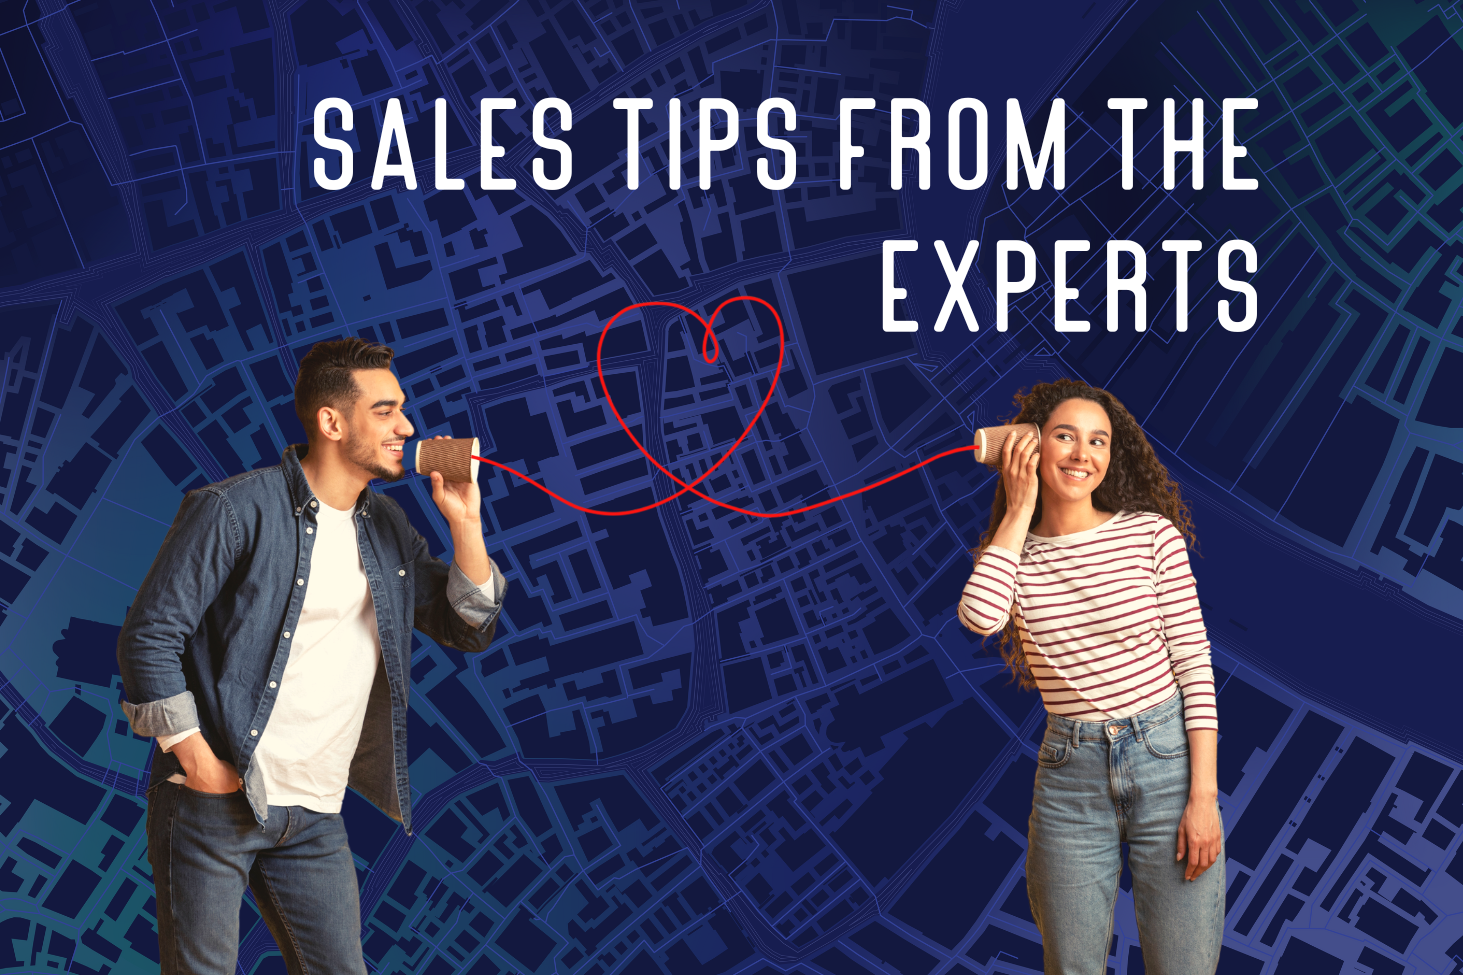 Sales tips from the experts